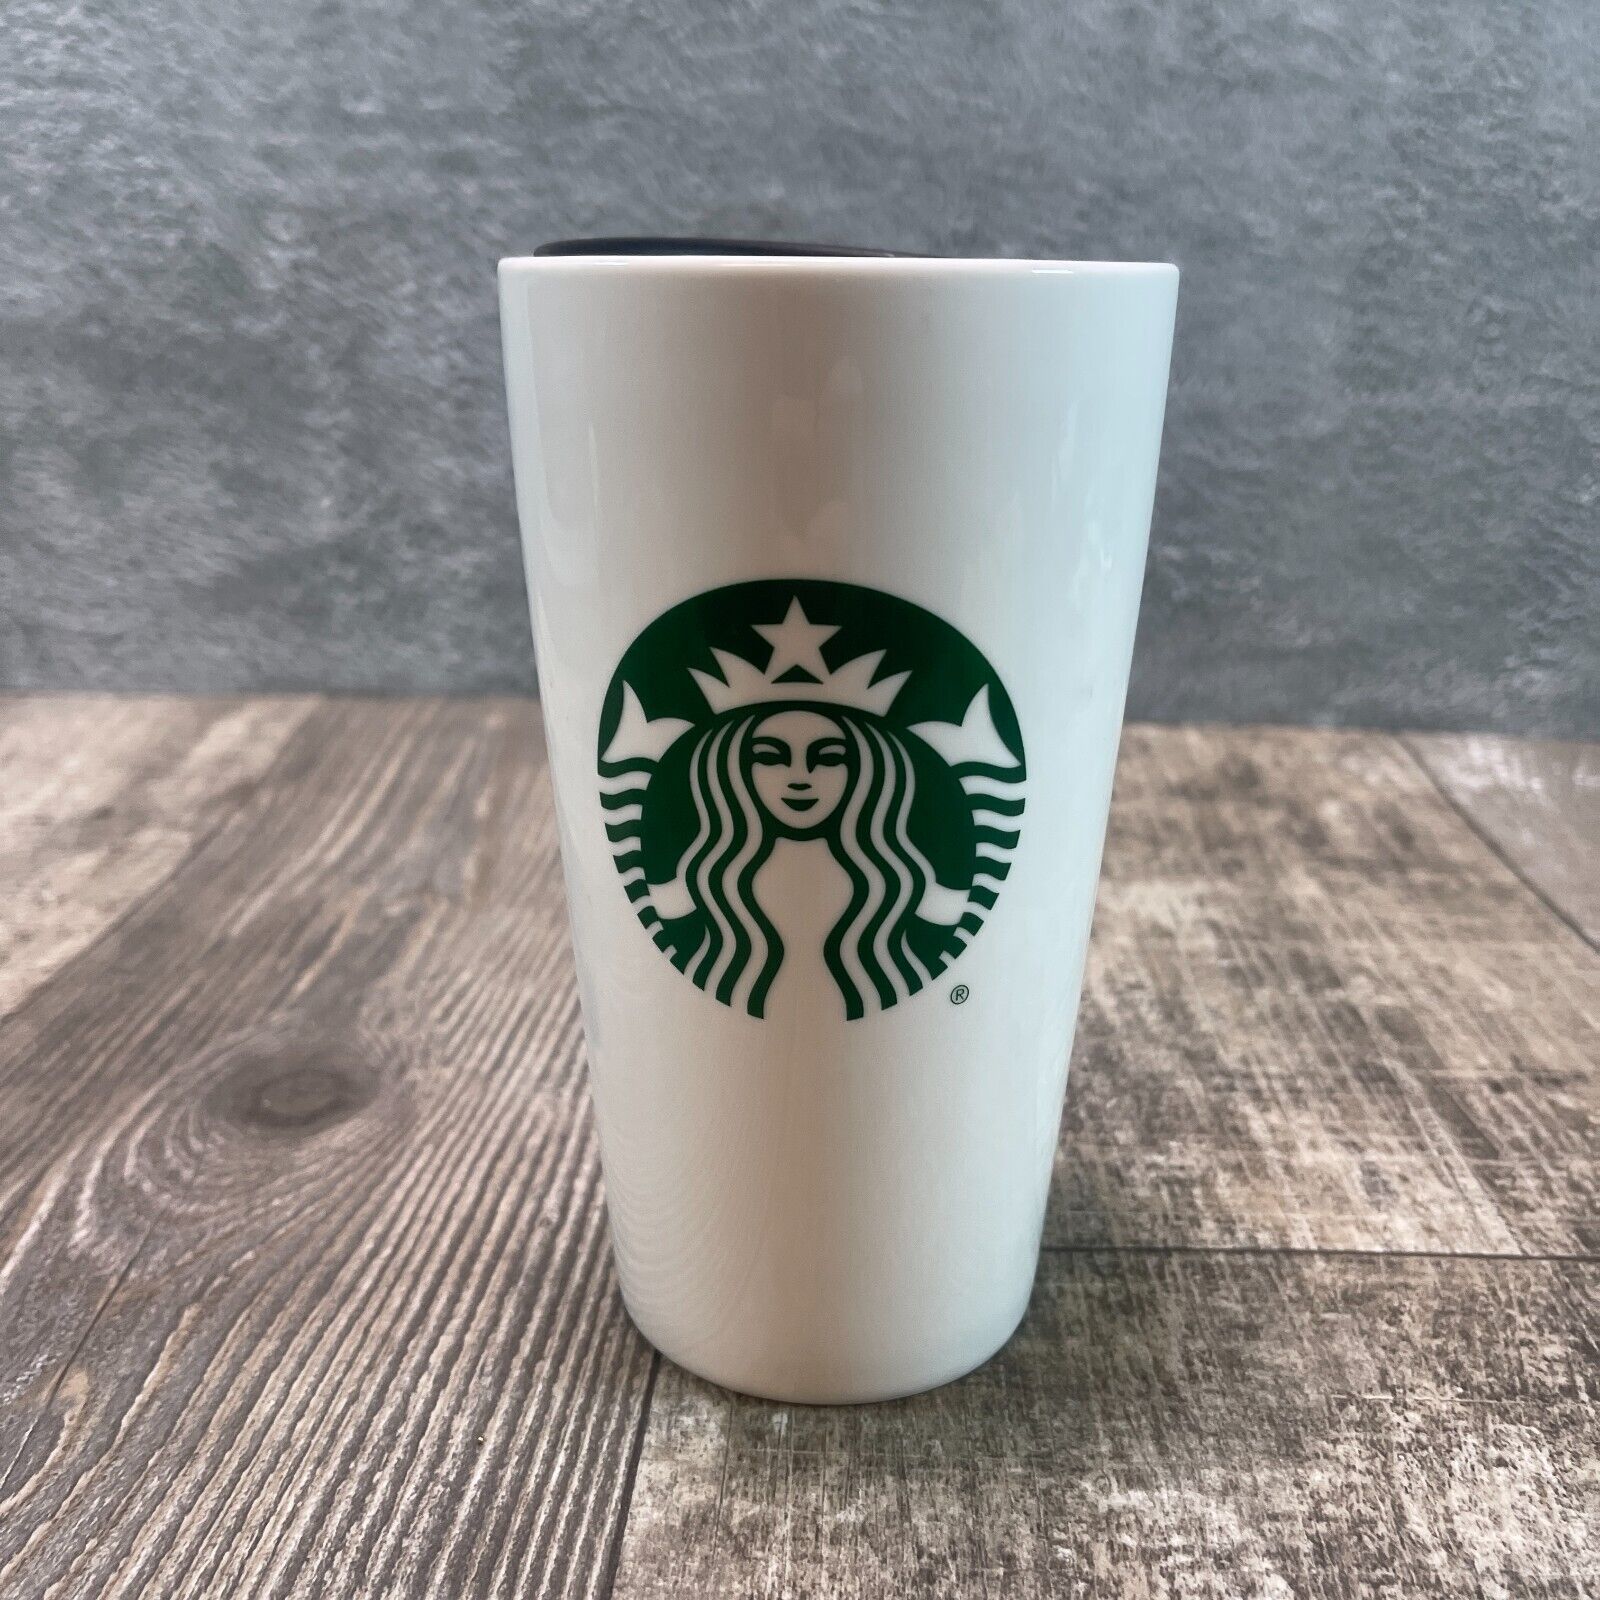 Primary image for Starbucks Classic White & Green 12 Ounce Ceramic Coffee Cup Mug Tumbler, 12 Oz